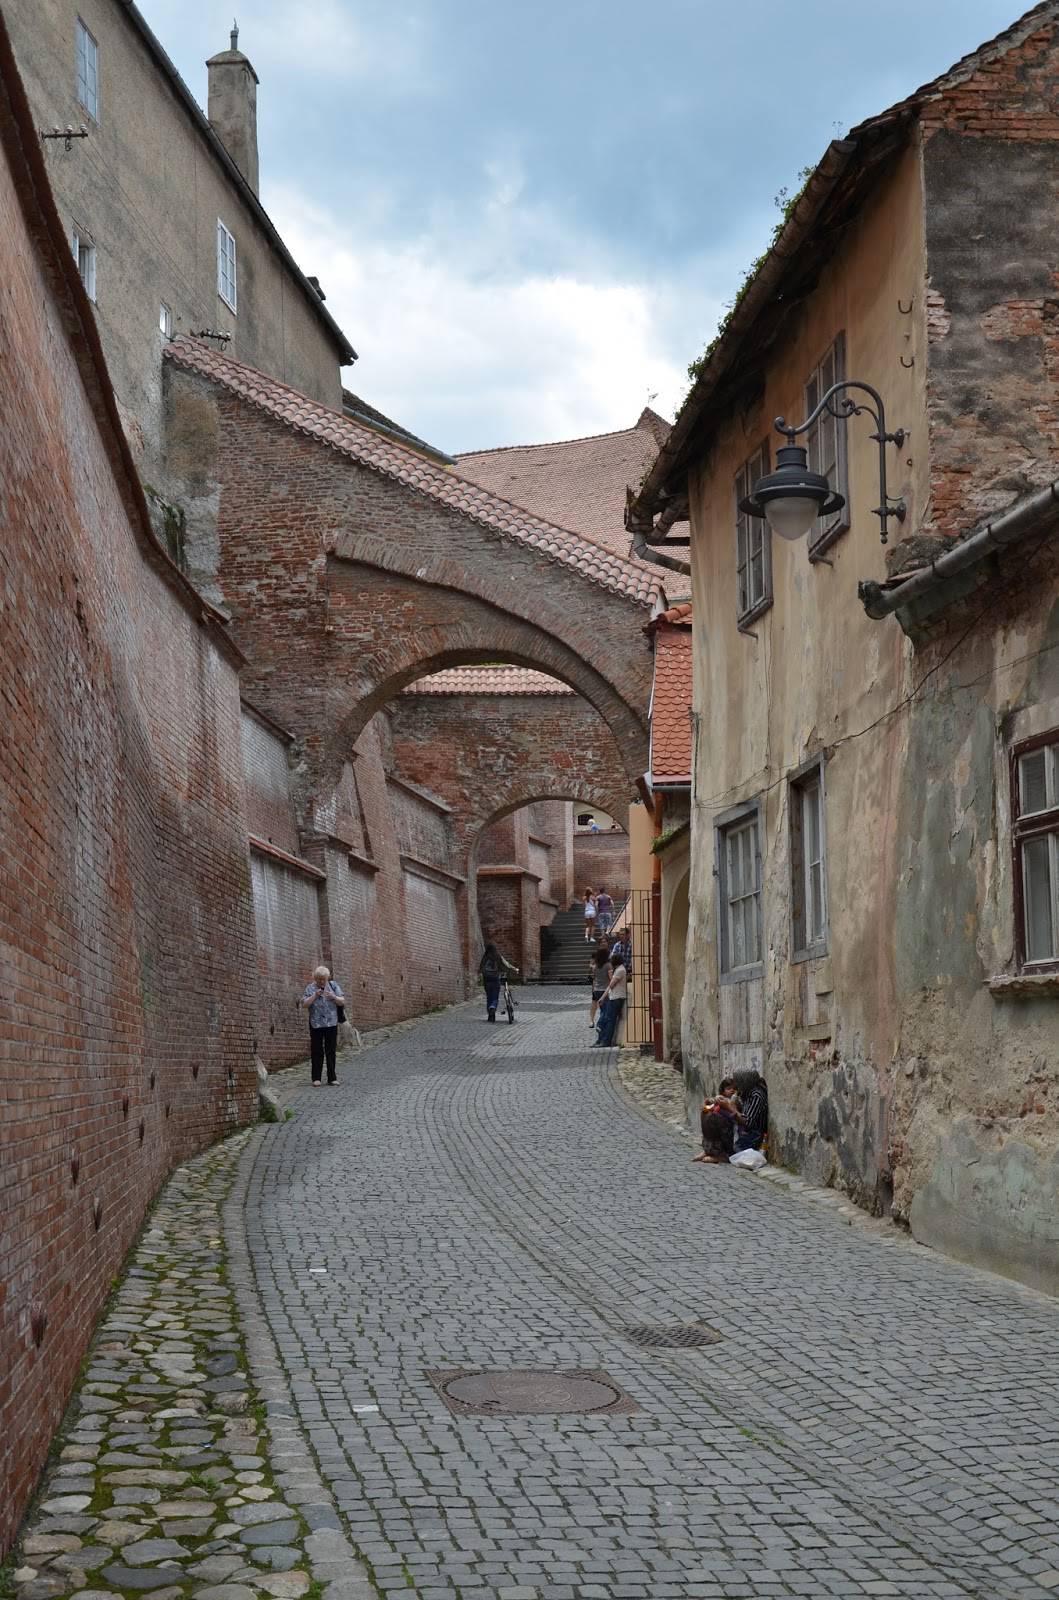 Passage of the Stairs in Sibiu, Romania